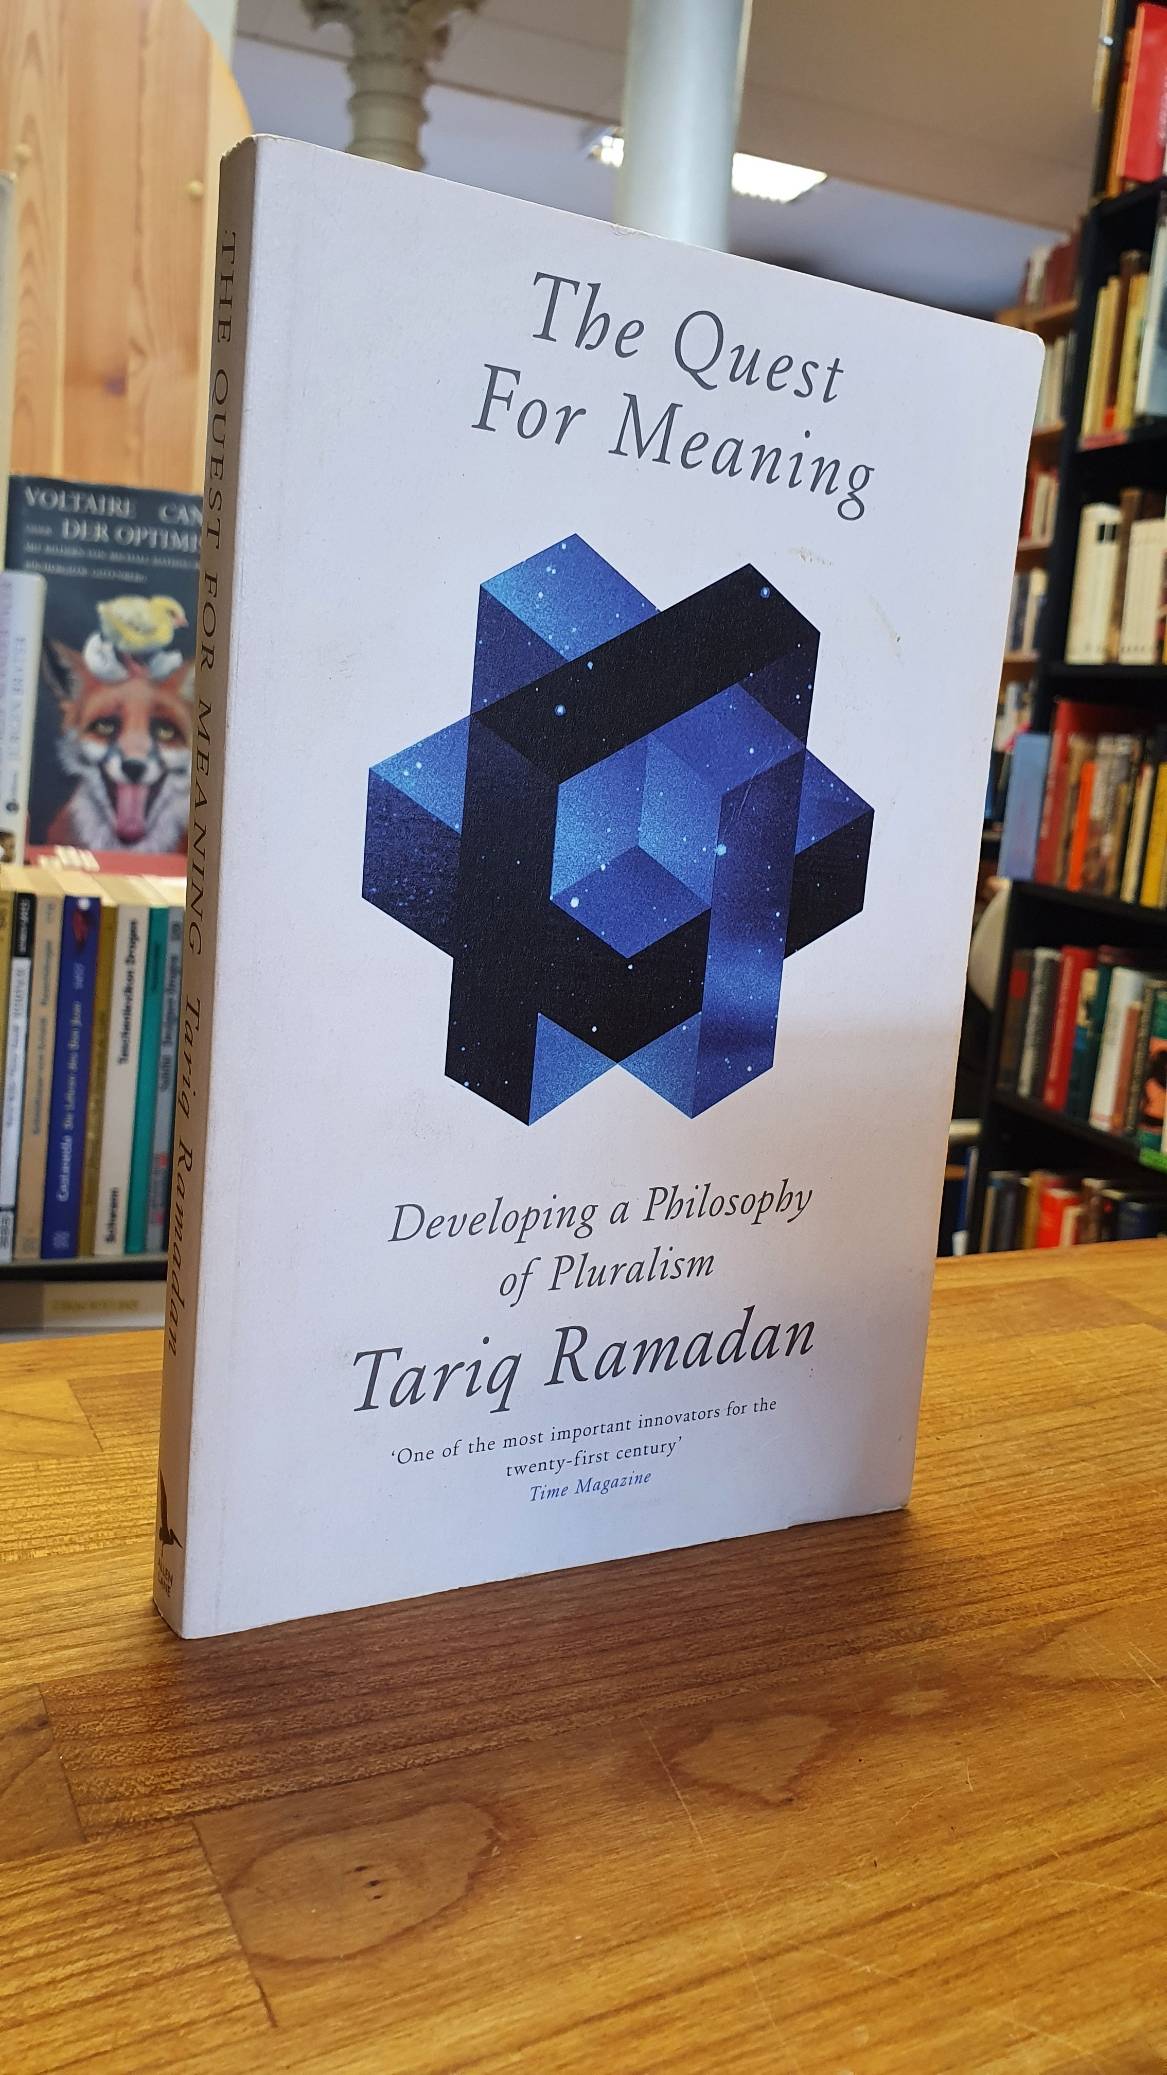 Ramadan, The Quest For Meaning – Developing A Philosophy Of Pluralism,